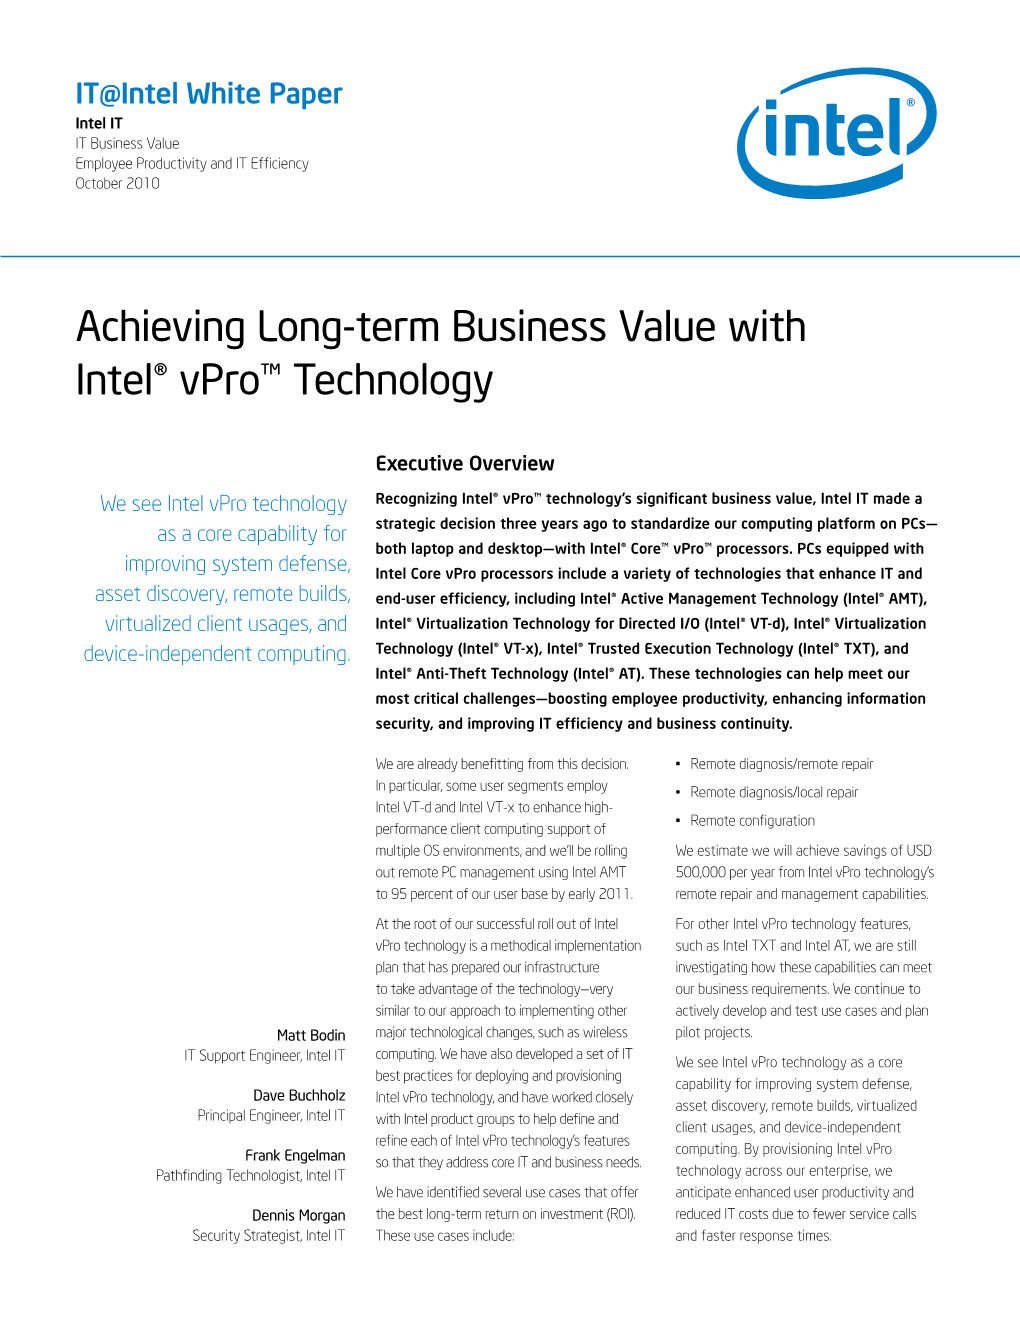 Achieving Long-Term Business Value with Intel® Vpro™ Technology